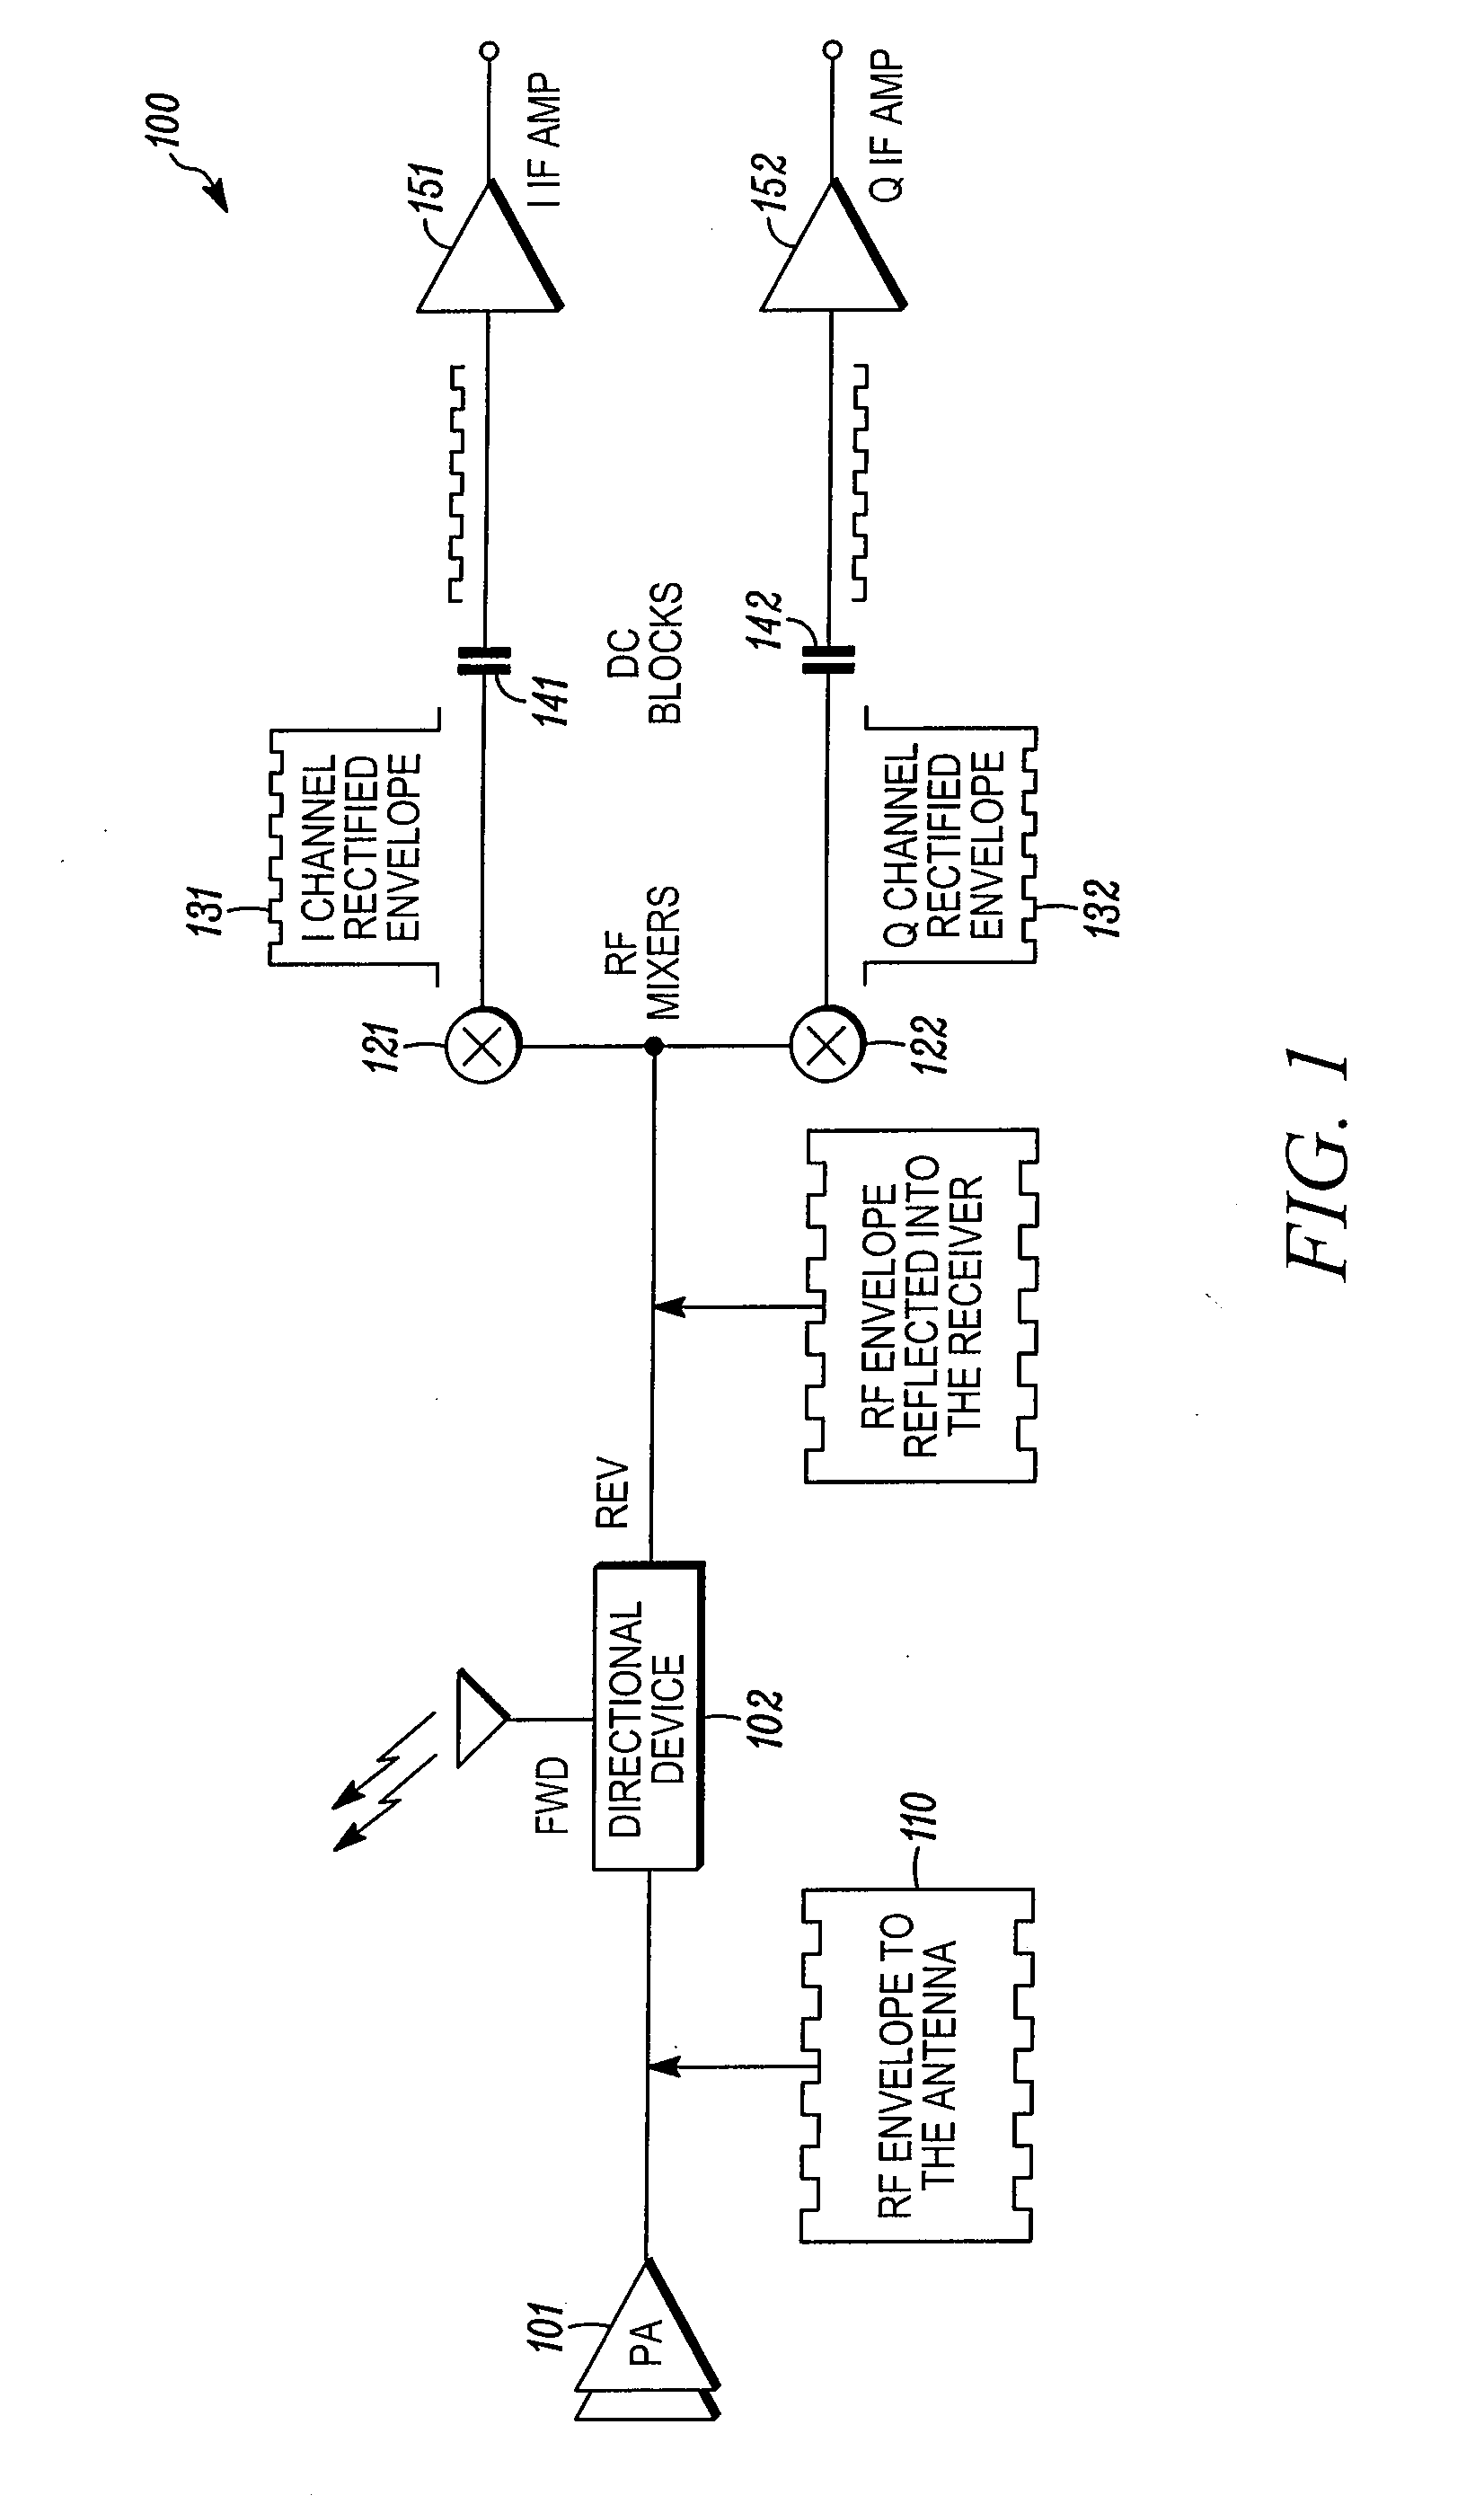 Method and System for Chopped Antenna Impedance Measurements with an RFID Radio